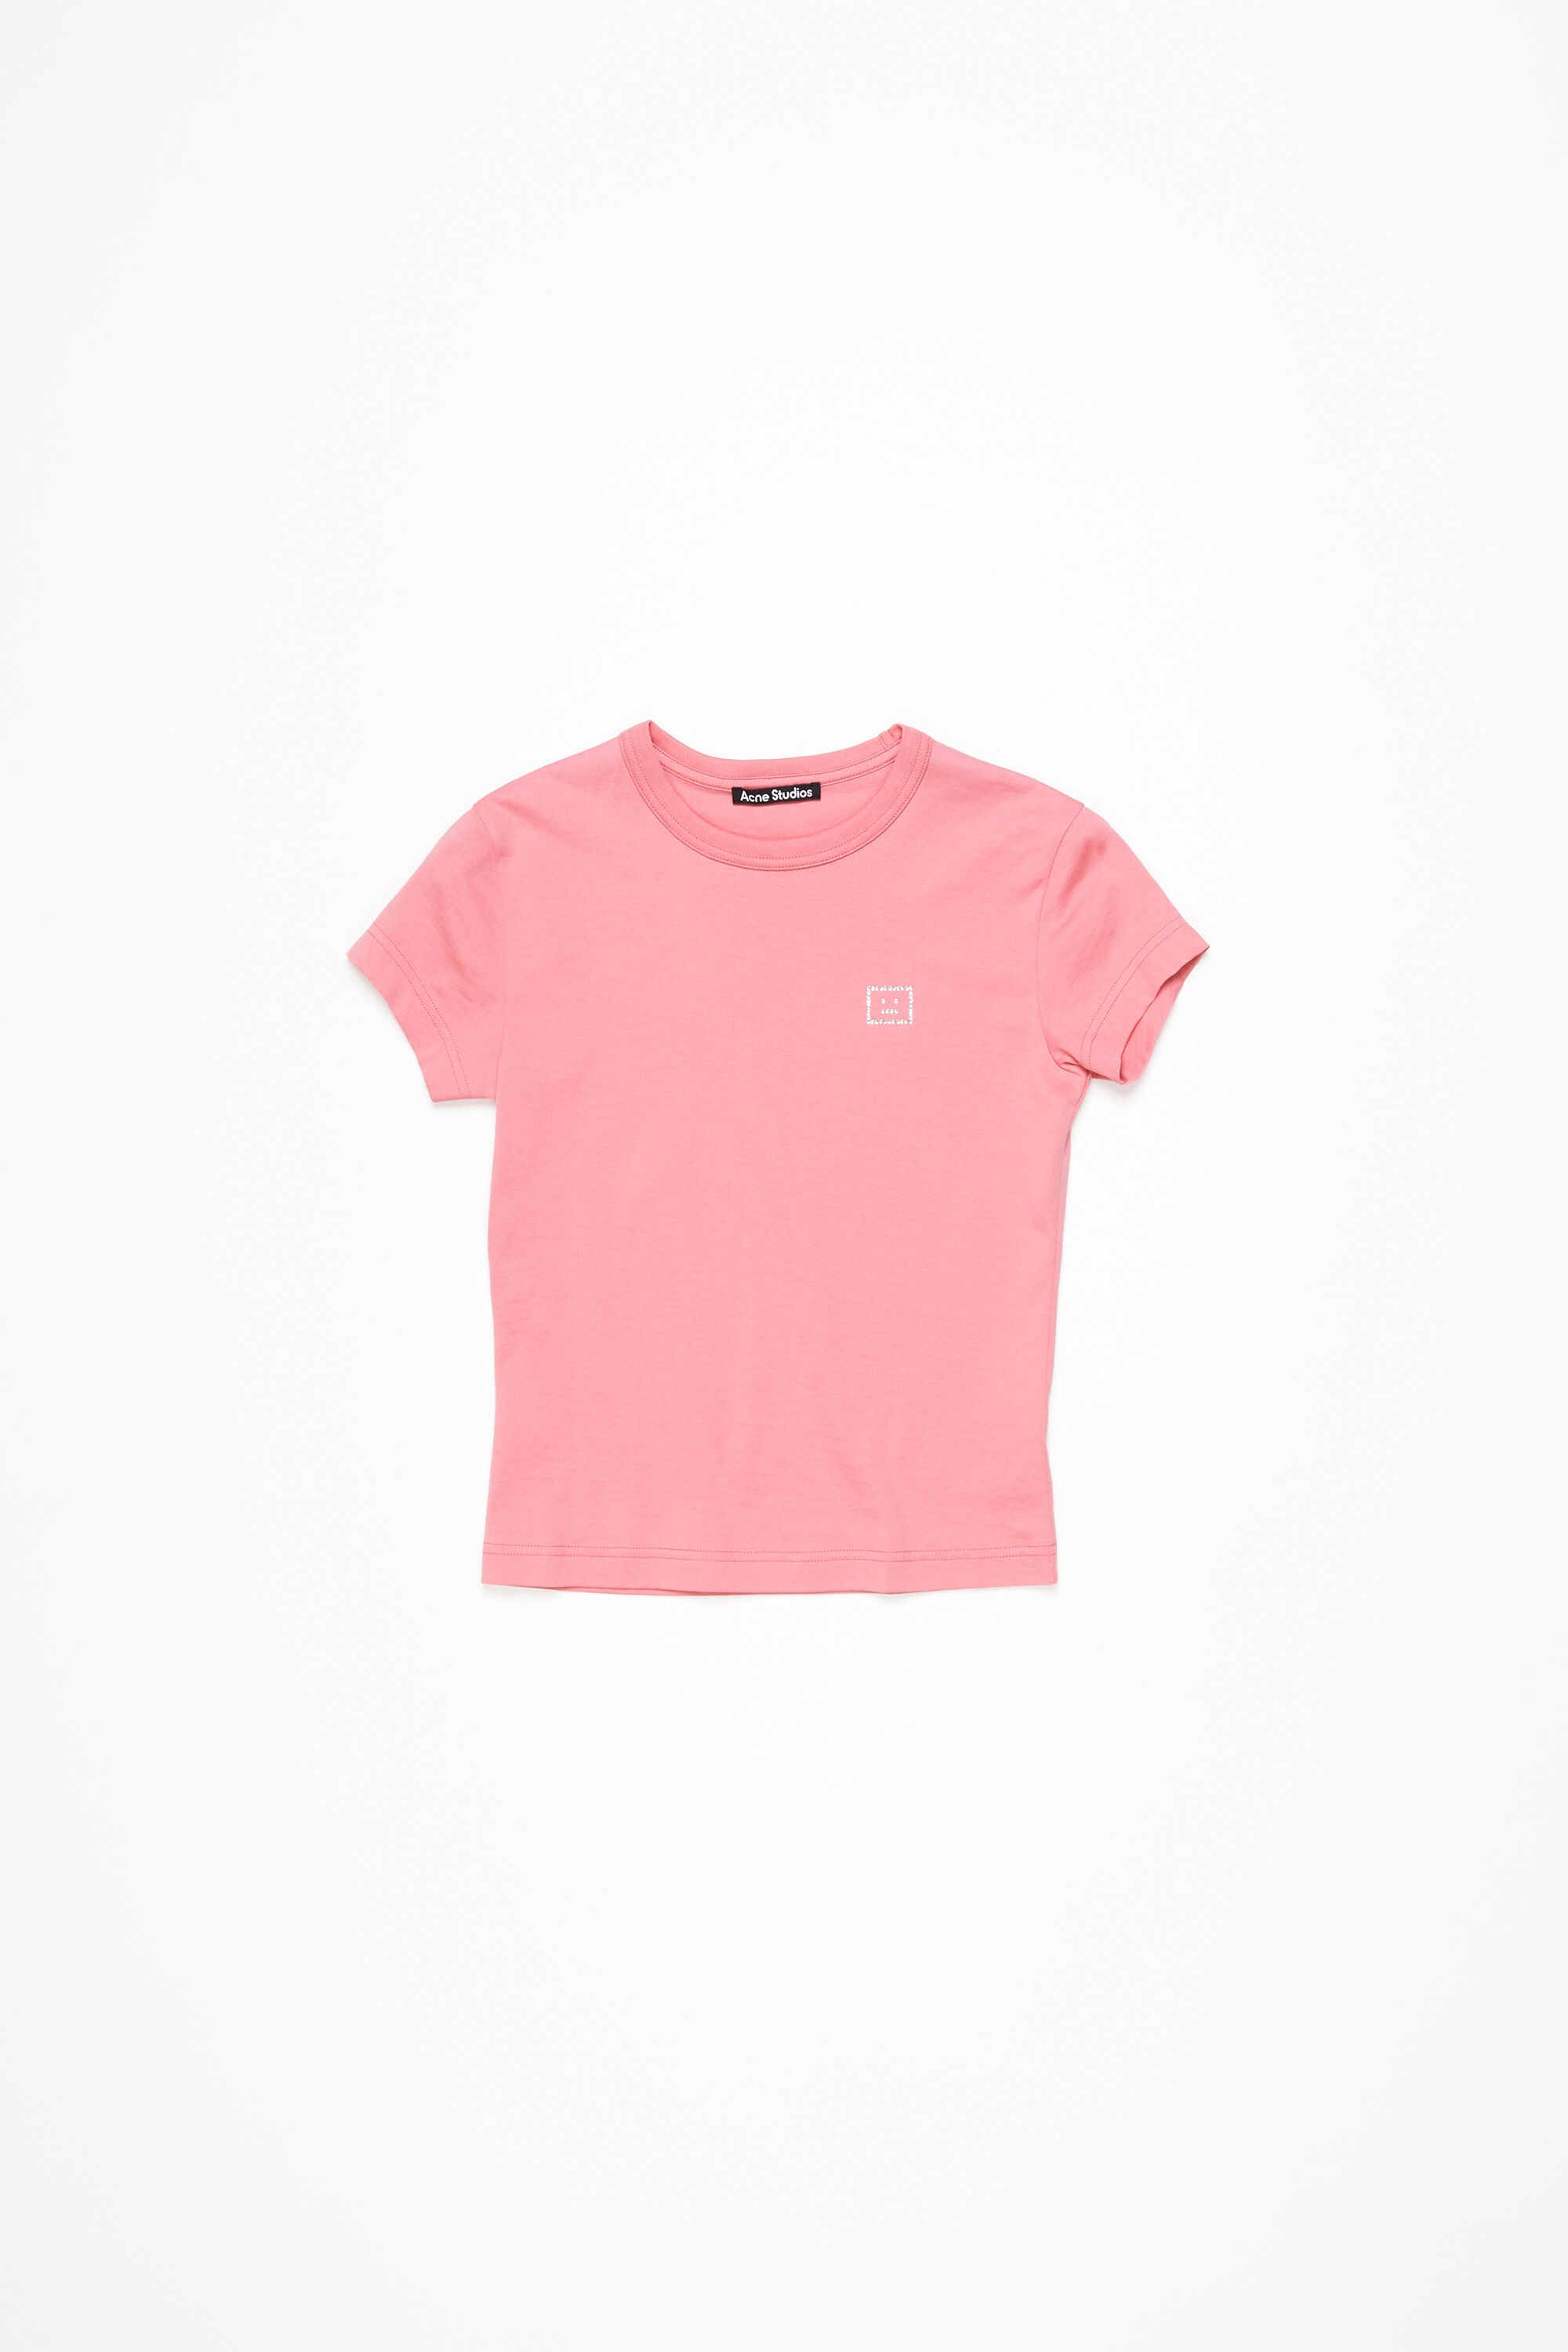 Crew neck t-shirt - Fitted fit - Tango pink - 5